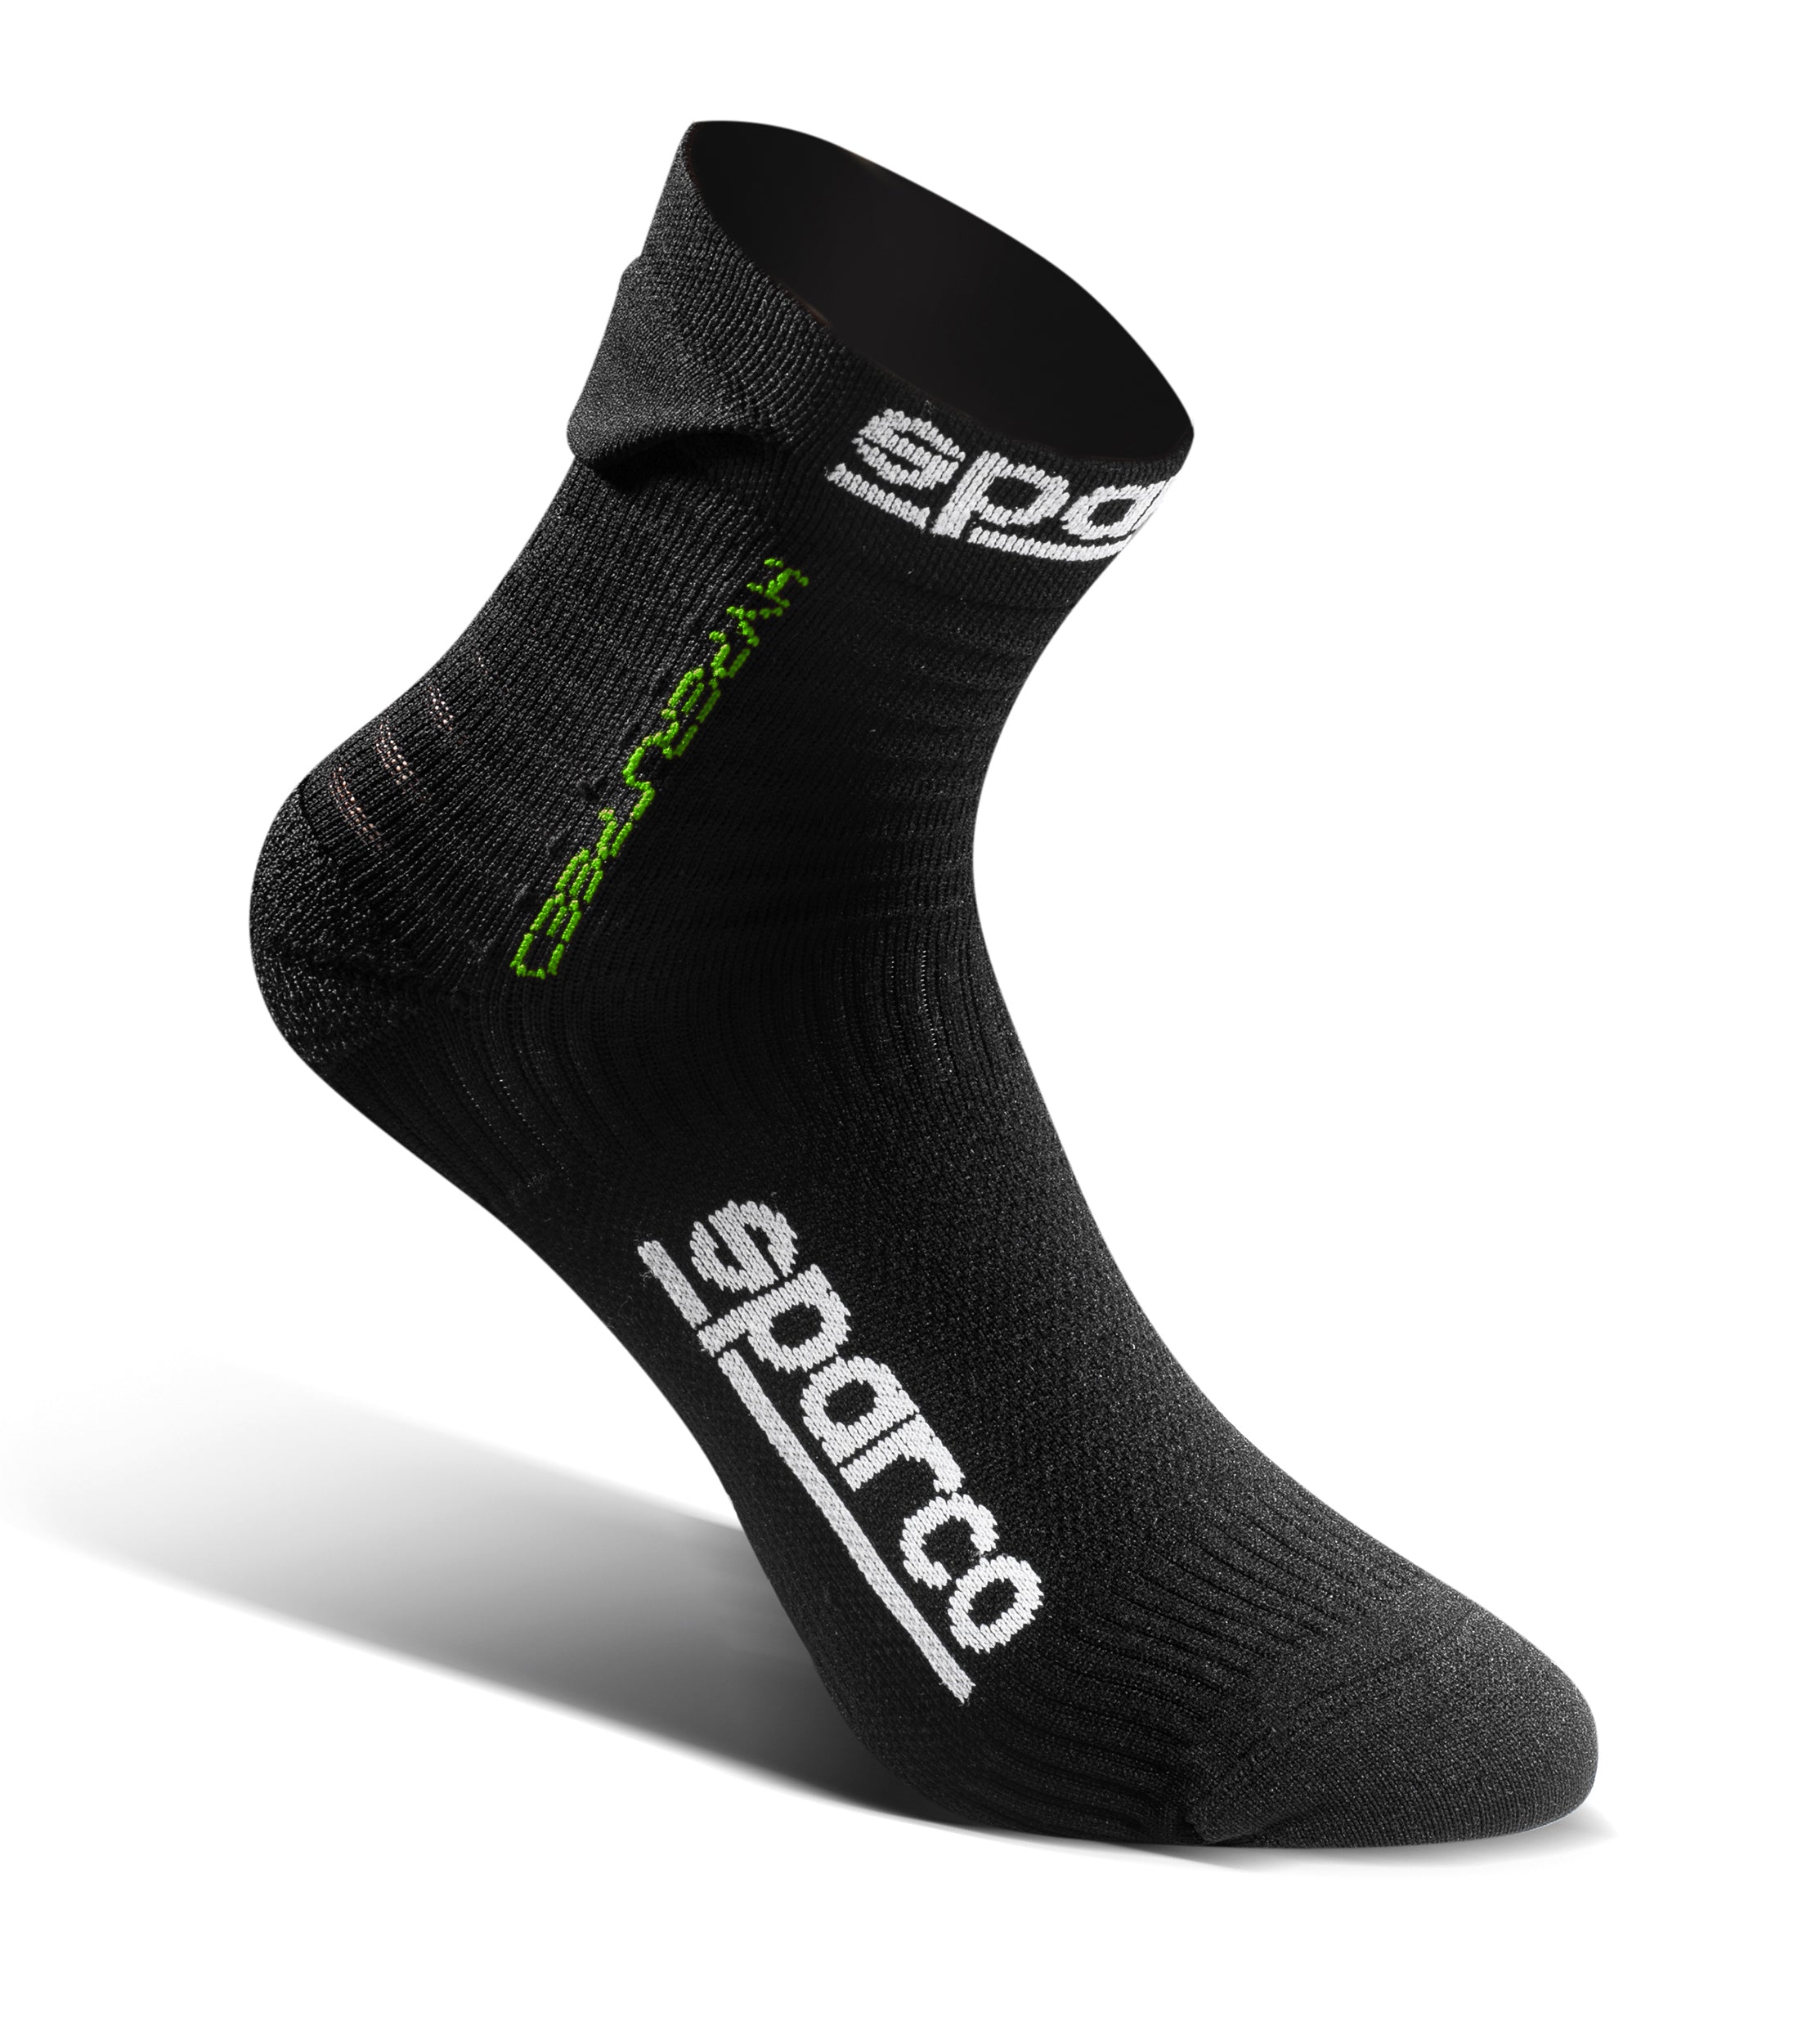 SPARCO 01290NRVF4647 Driving socks HYPERSPEED, black/green, size 46/47 Photo-0 